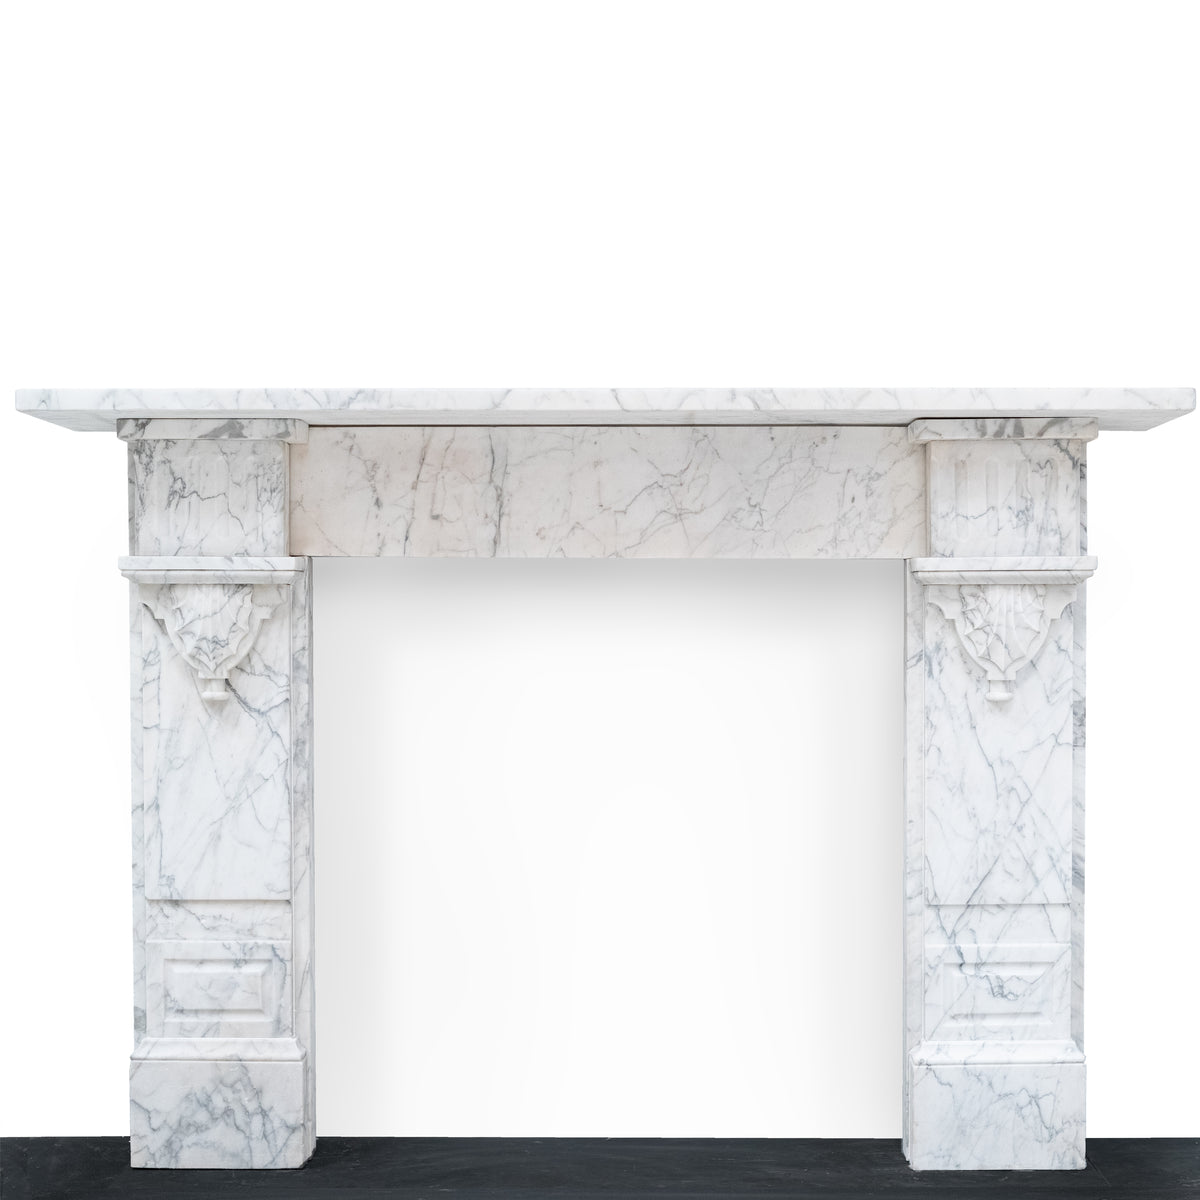 Impressive Antique Late Victorian Marble Chimneypiece | The Architectural Forum